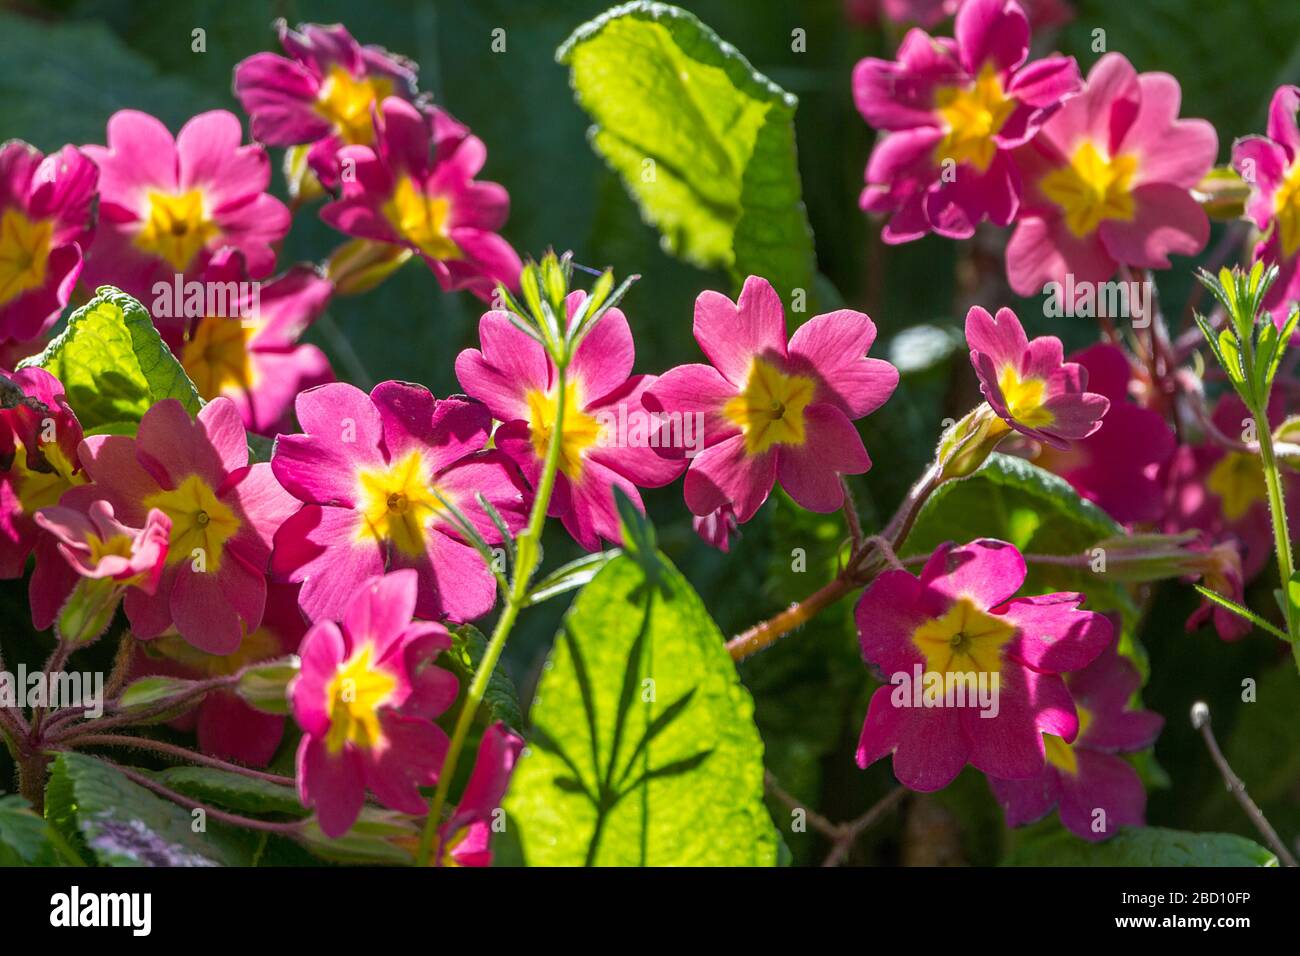 Primula type flowers with yellow star shaped centre and five heart shaped purple petals growing in clumps in local areas. Broad hairy green leaves Stock Photo